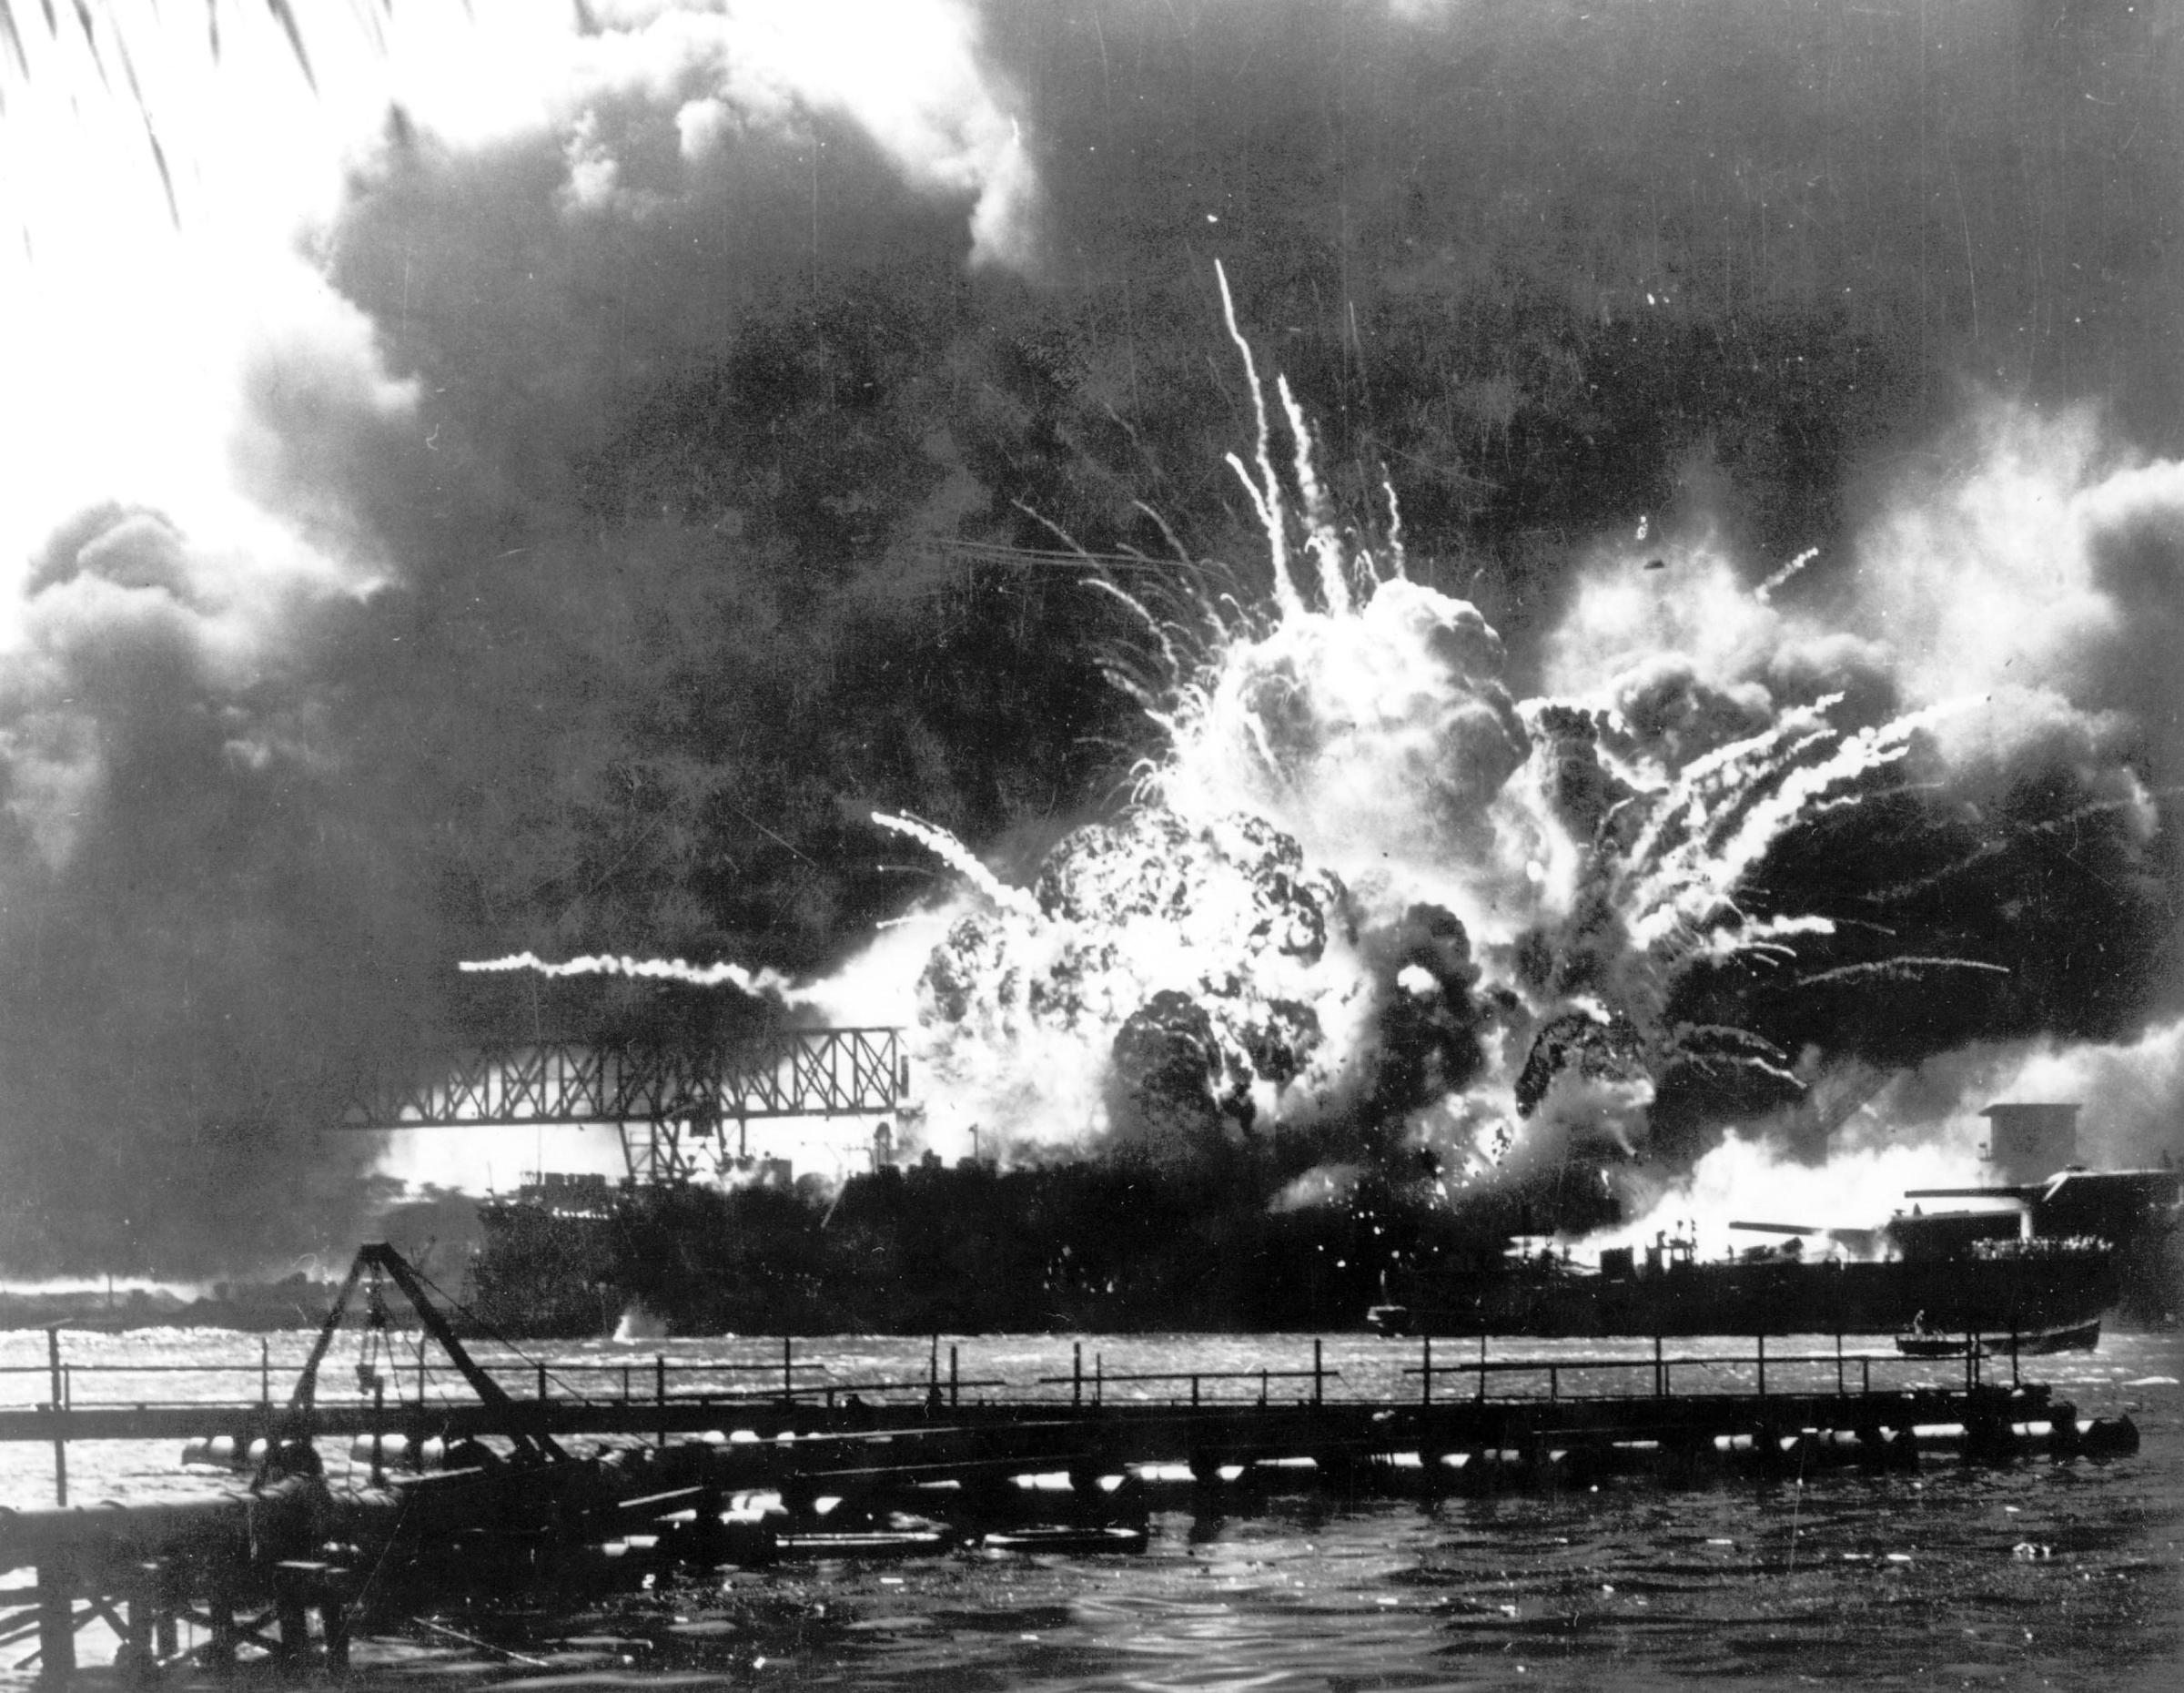 The destroyer USS Shaw explodes after being hit by bombs during the Japanese surprise attack on Pearl Harbor on Dec. 7, 1941.